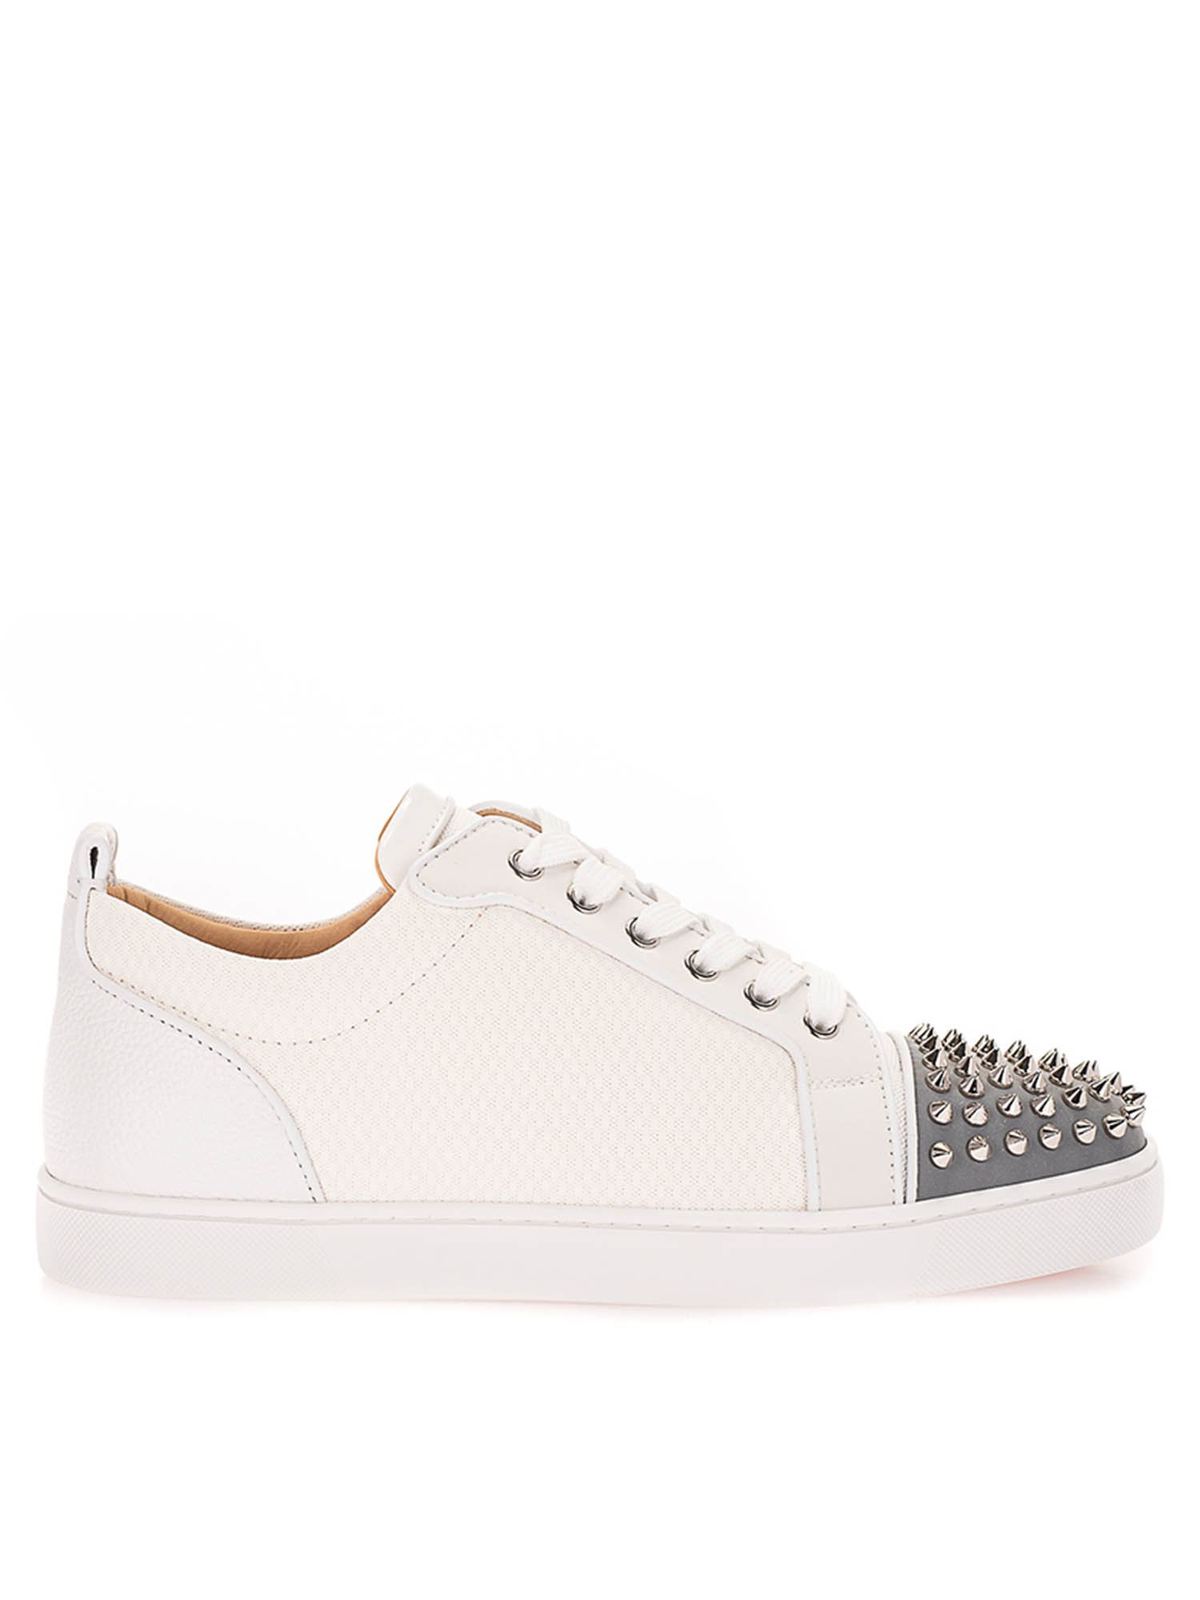 Christian Louboutin Louis Junior Spike Orlando Trainers In White